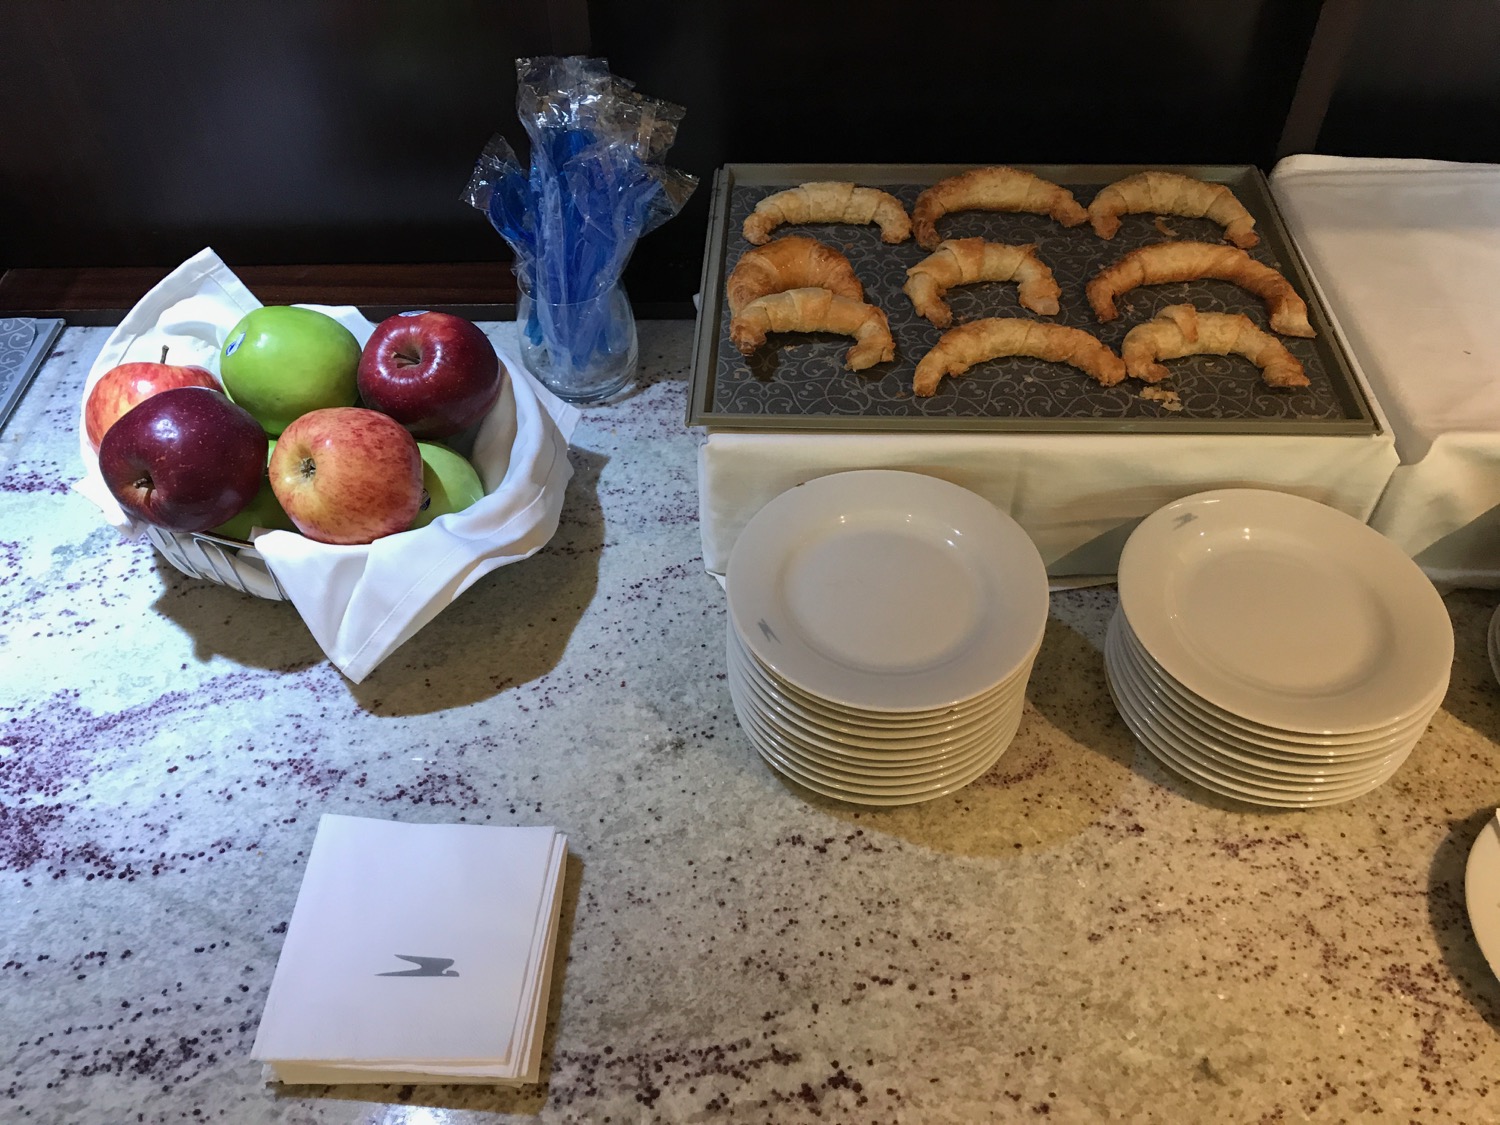 a tray of croissants and apples on a table